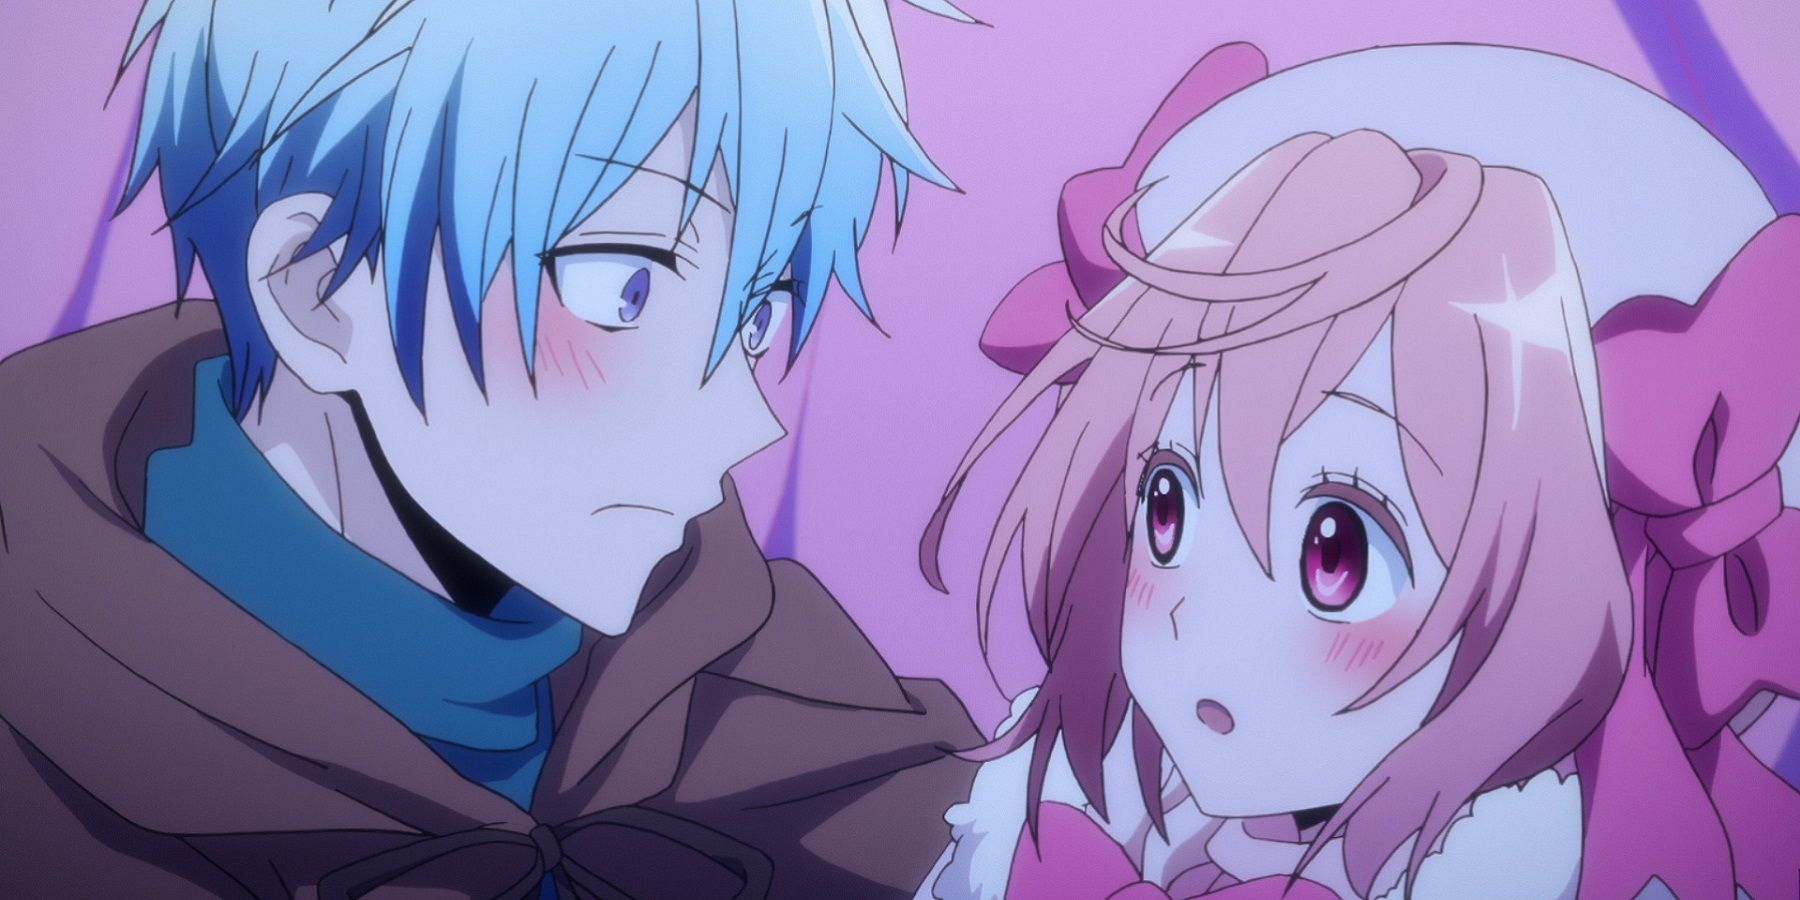 10 Adorably Dorky Anime About Games & Gaming Culture Ranked